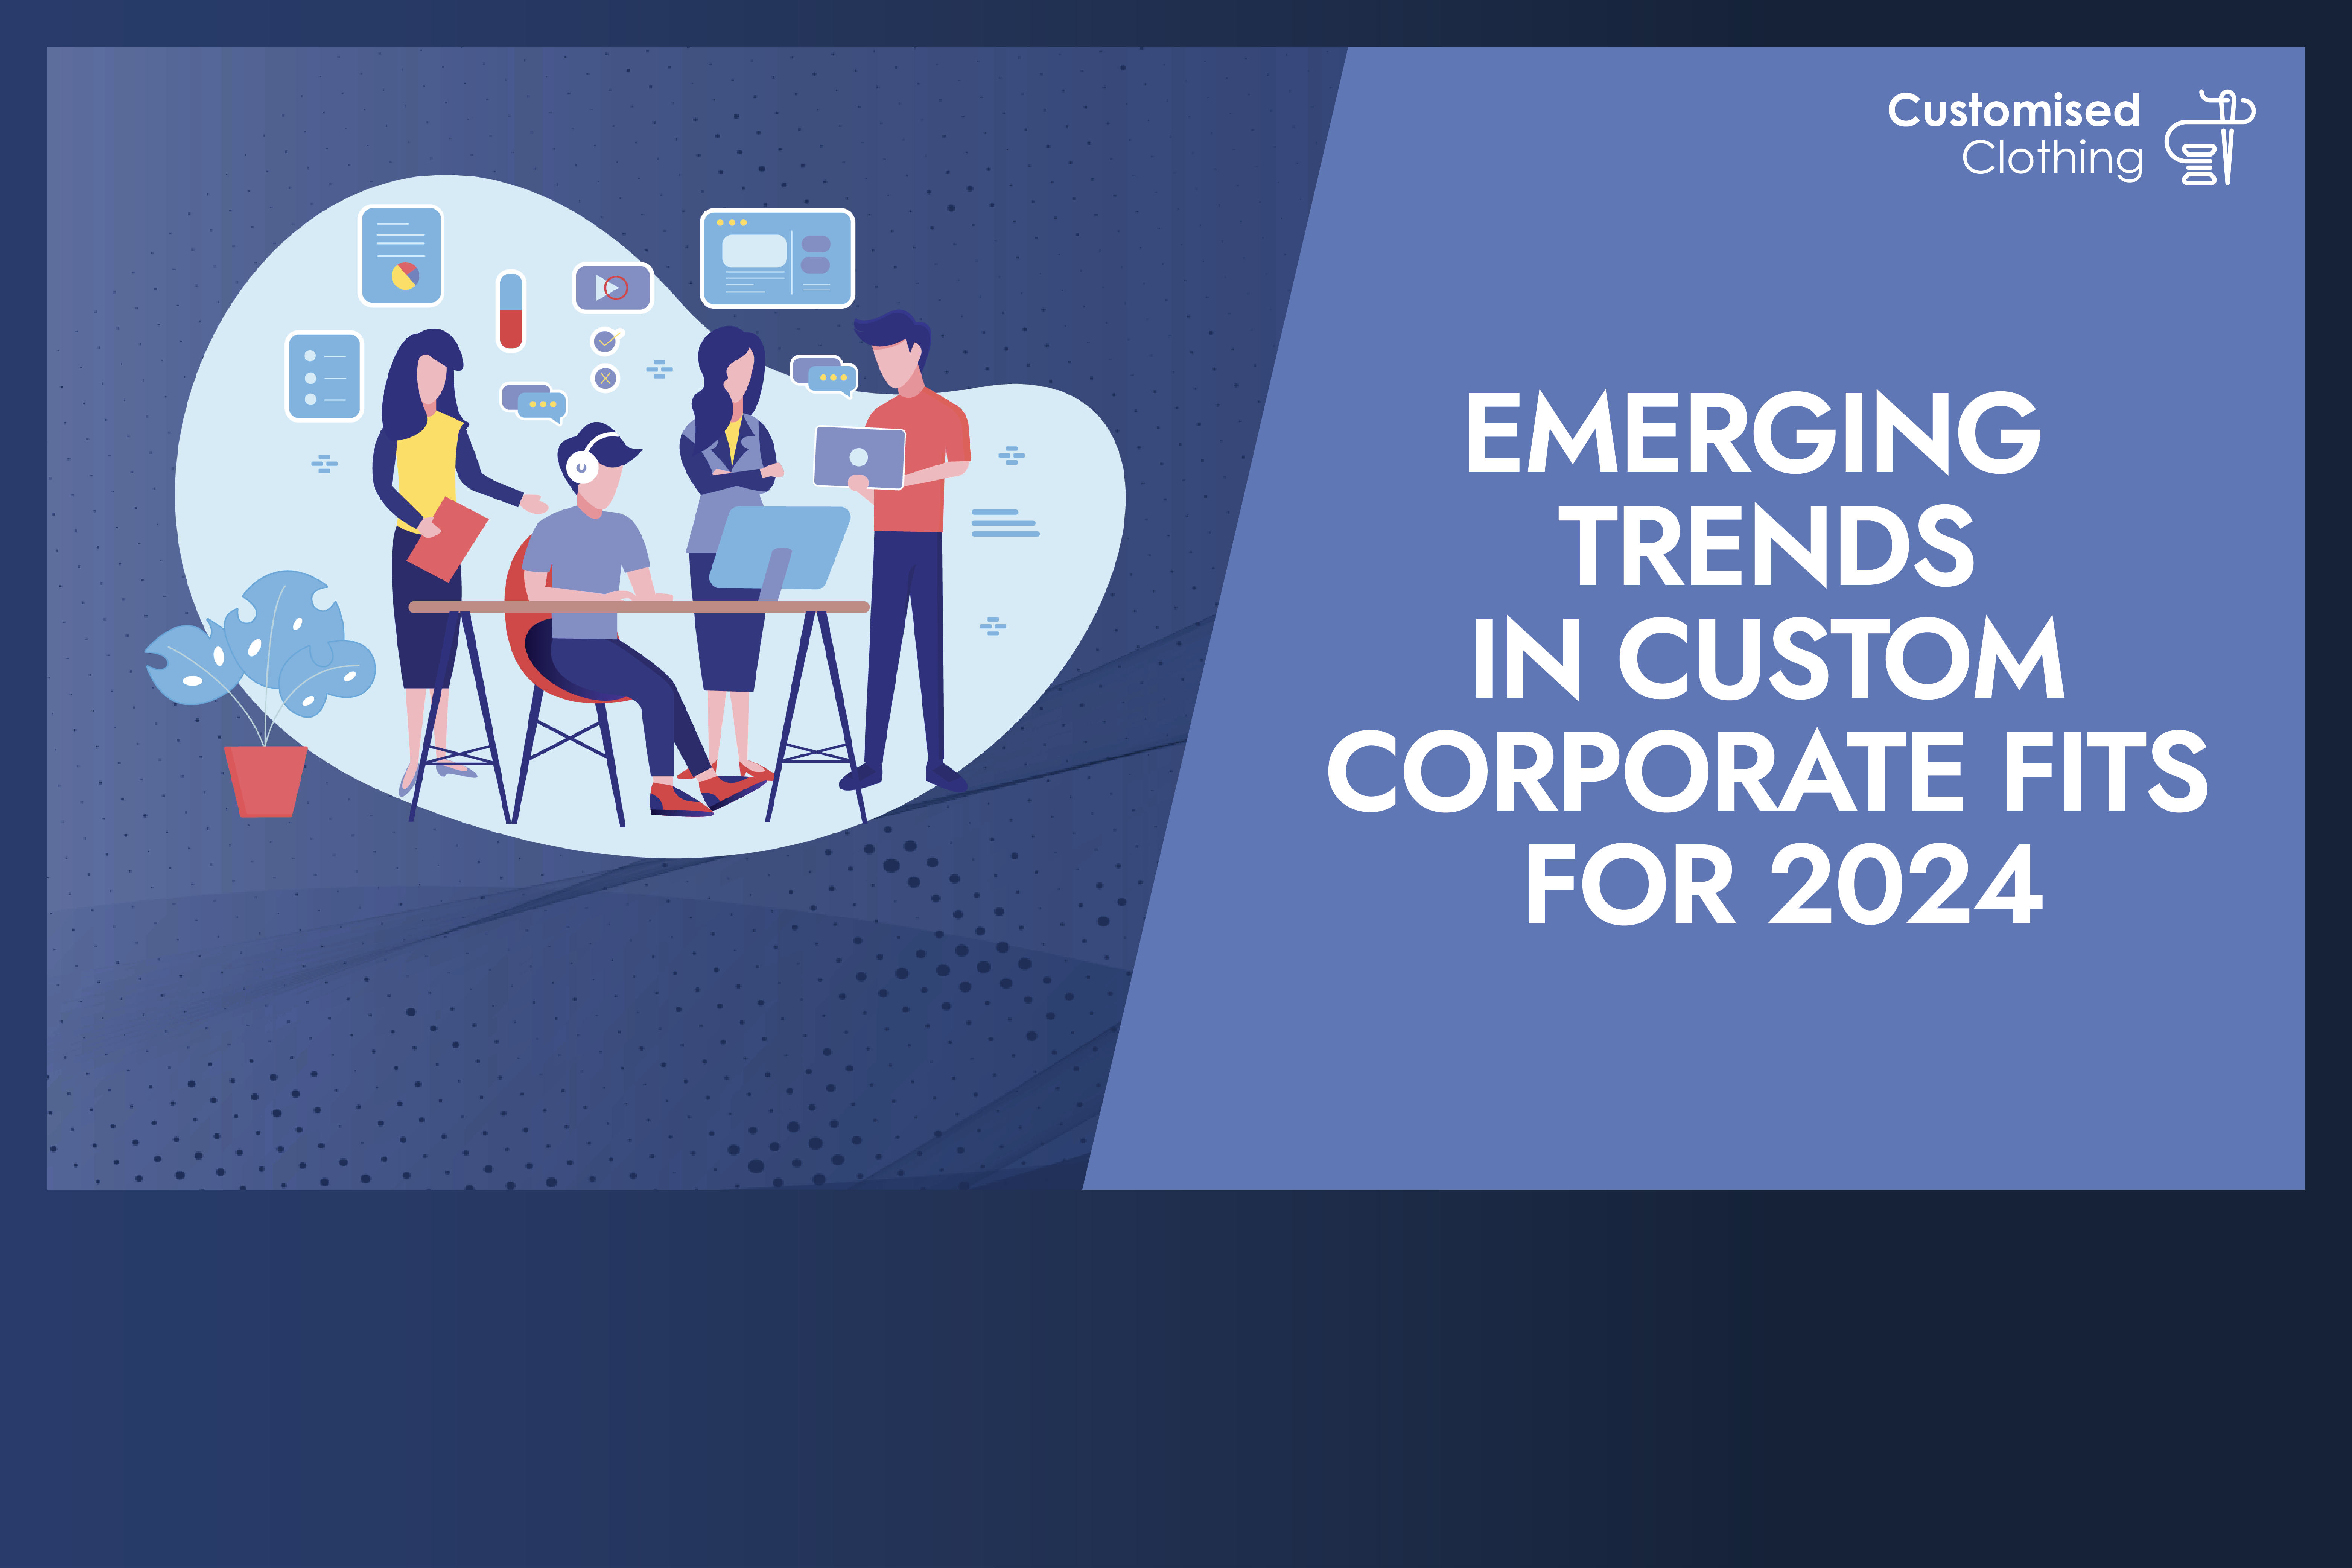 Emerging Trends in Custom Corporate Fits for 2024